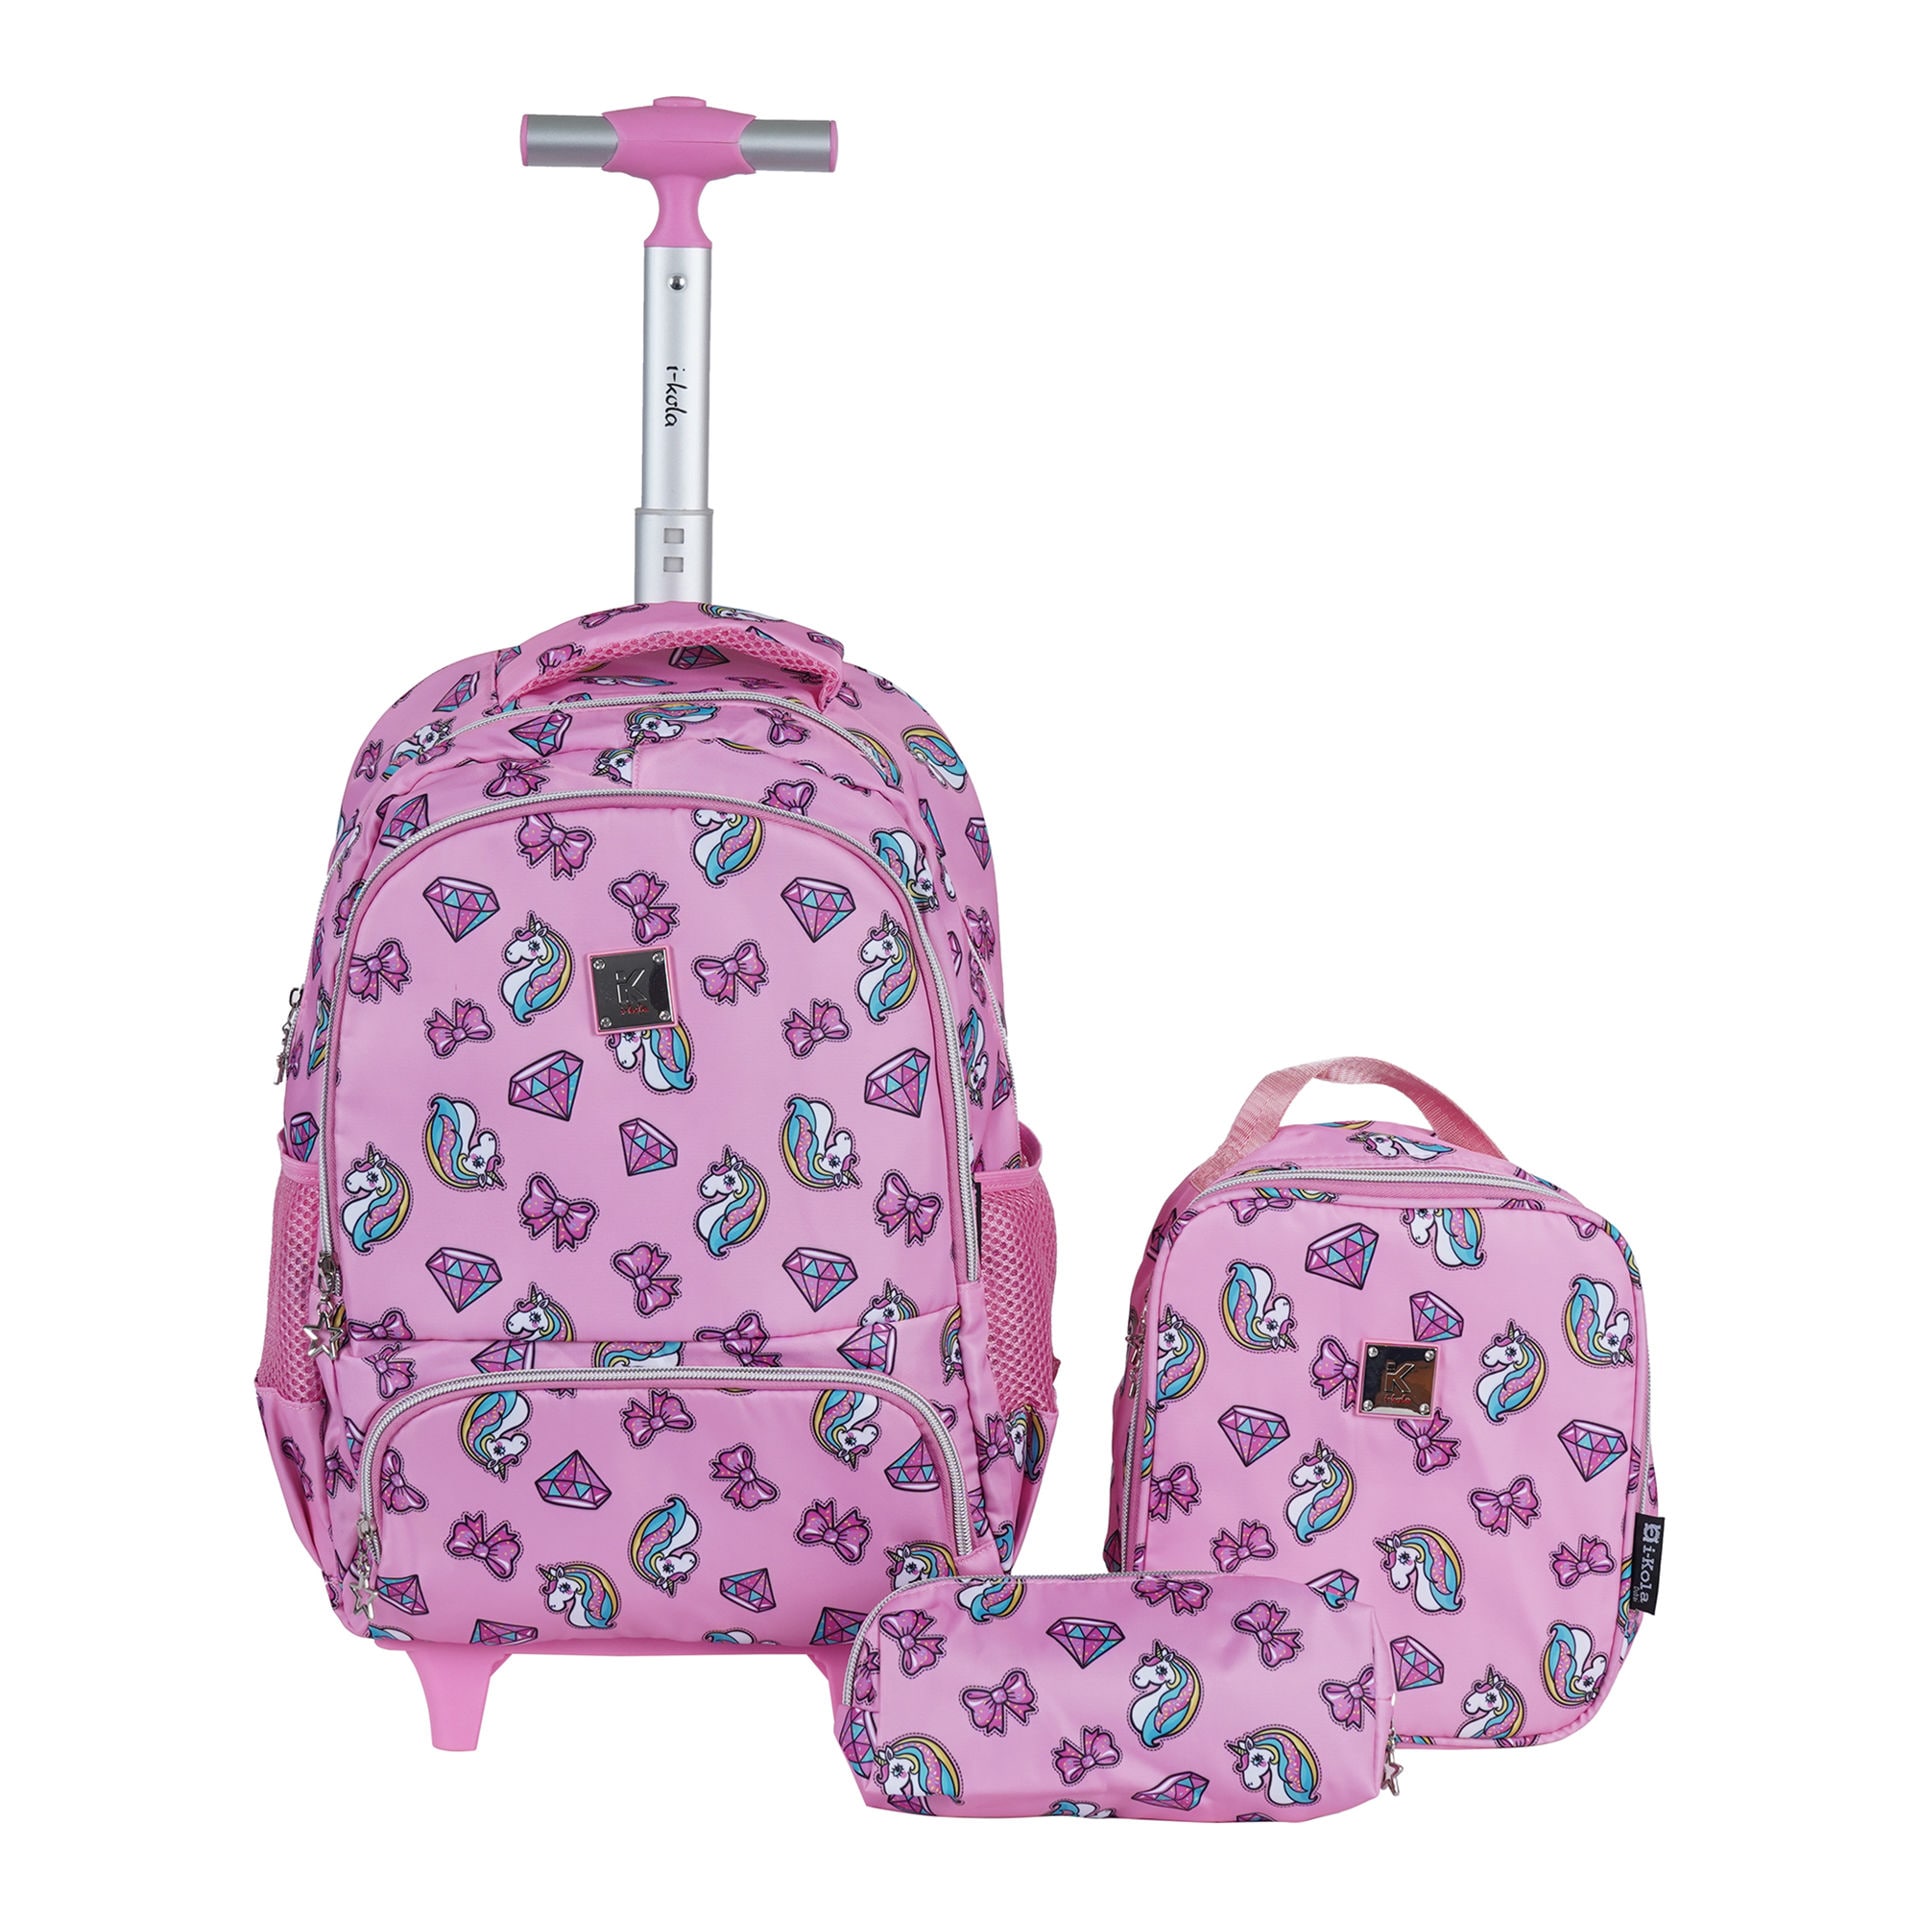 Pine Kids Trolley Luggage Bags White 22 inch Online in India, Buy at Best  Price from Firstcry.com - 11050429